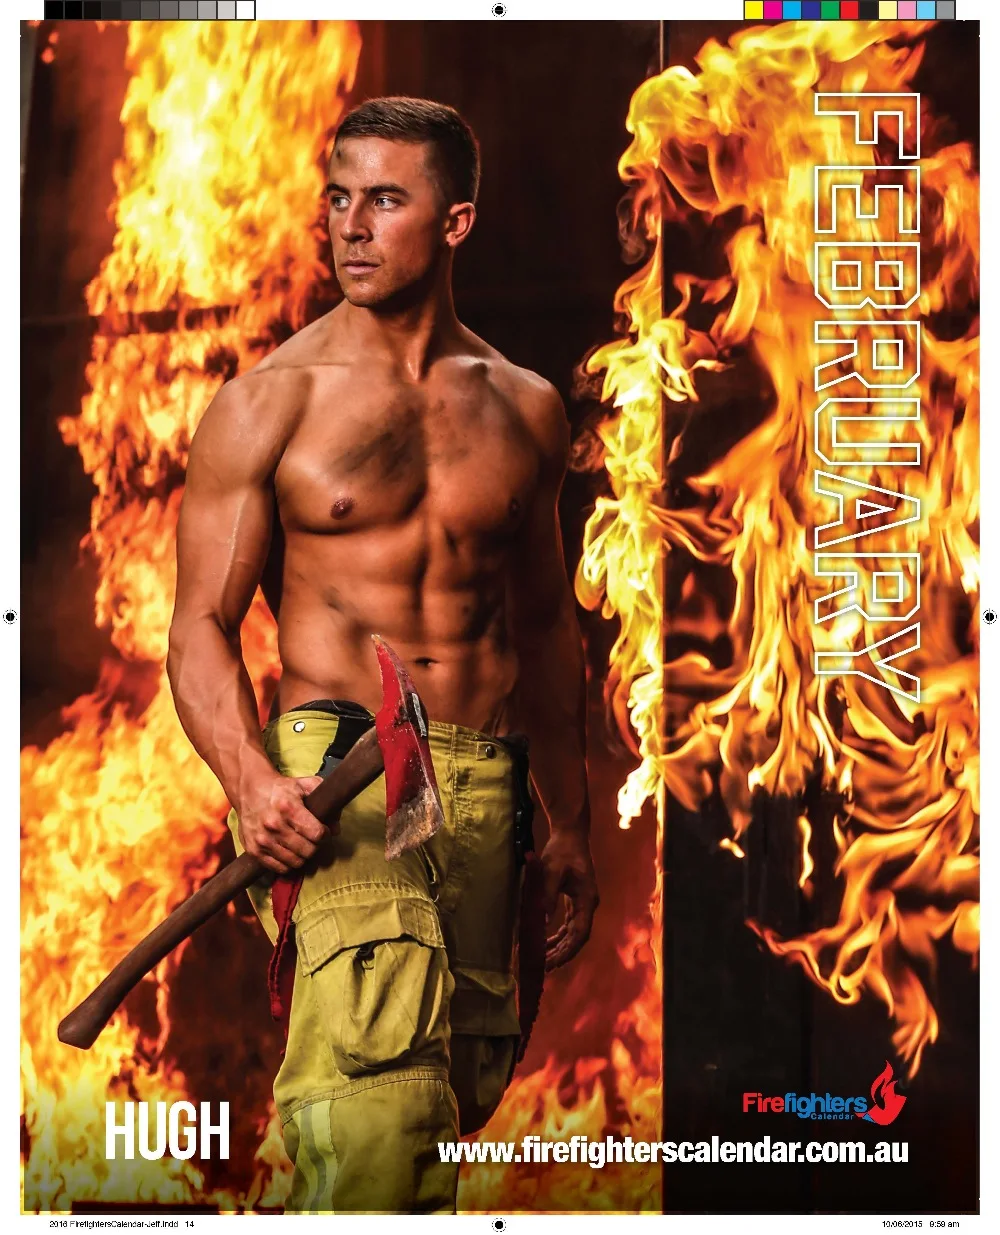 First Married Firefighting Couple Strip Down For A Saucy Calendar